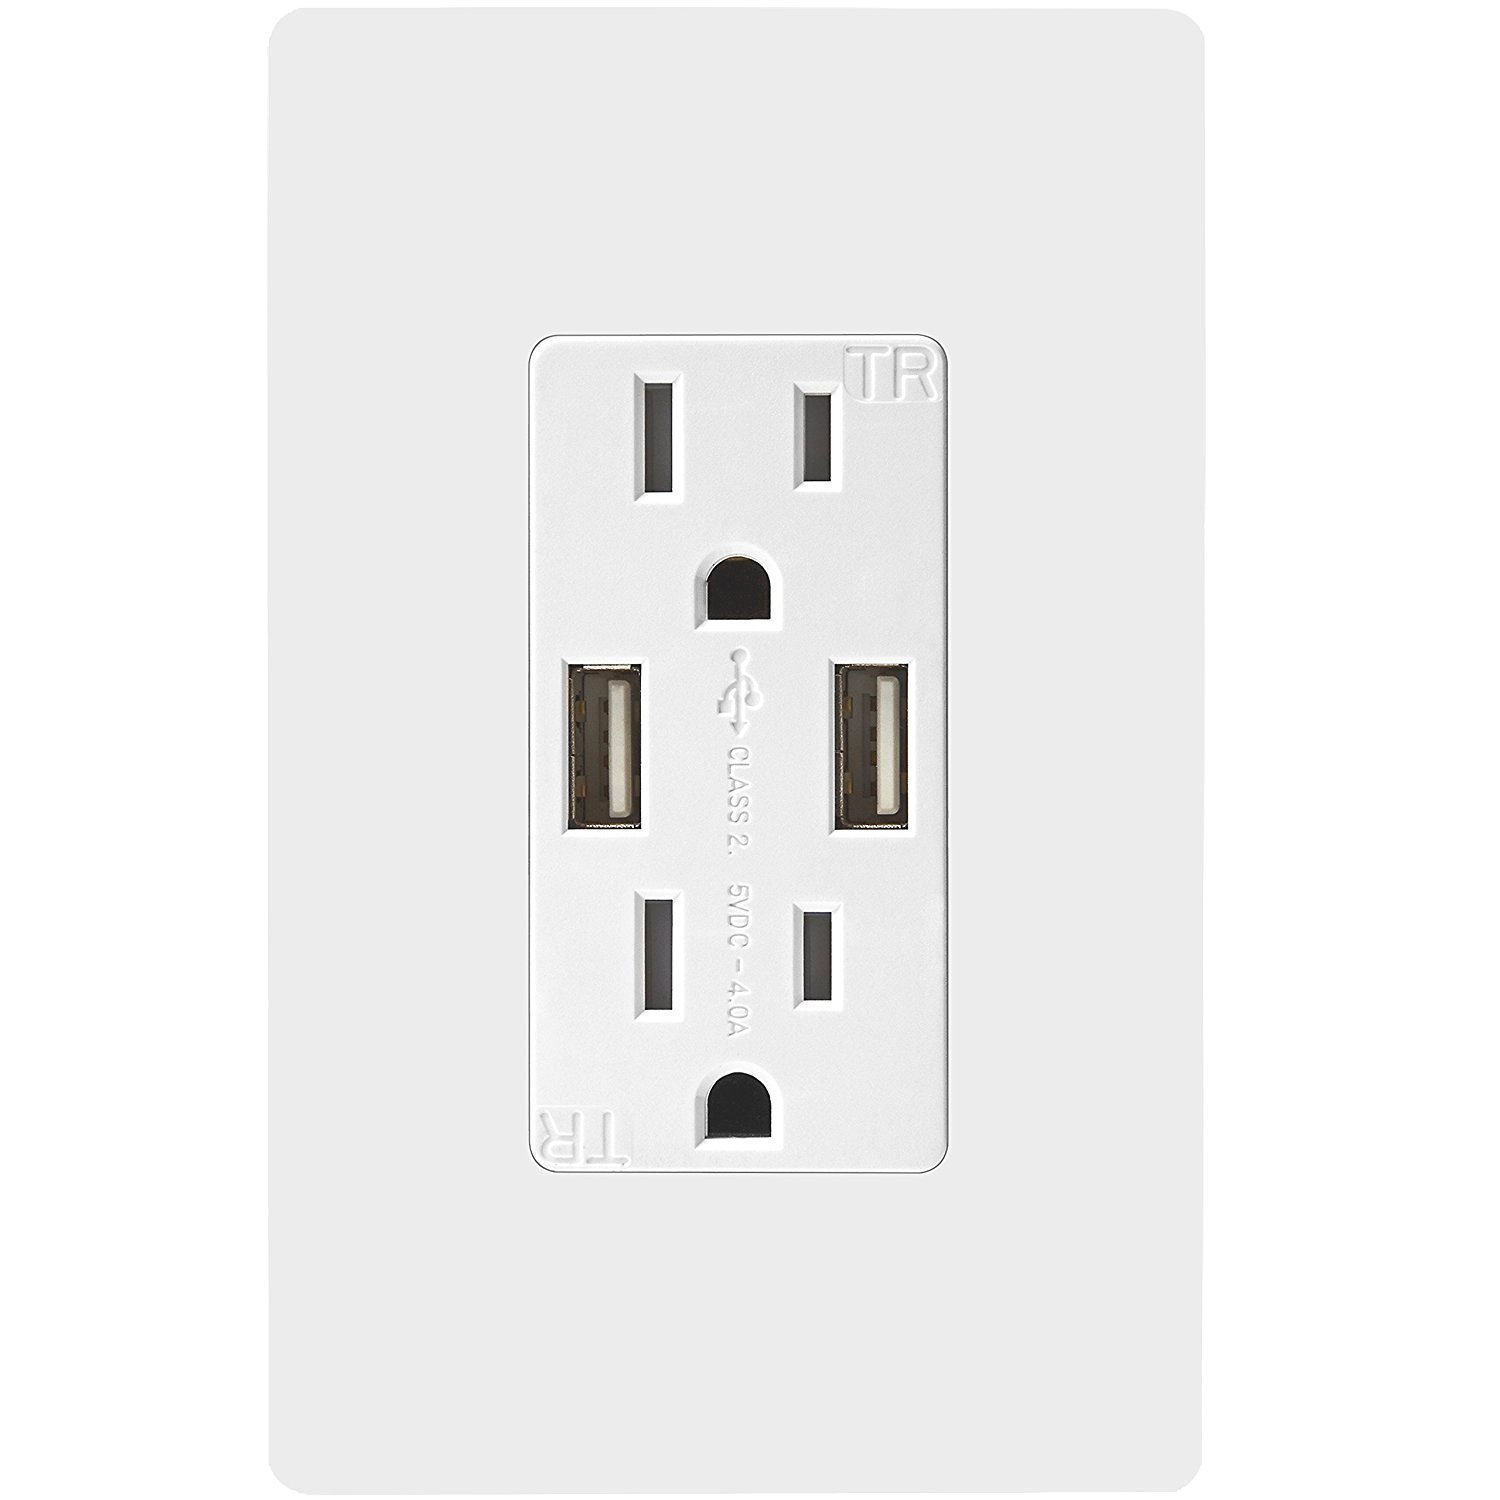 TOPGREENER TU2154A High Speed USB Charger Outlet, USB Wall Charger ...